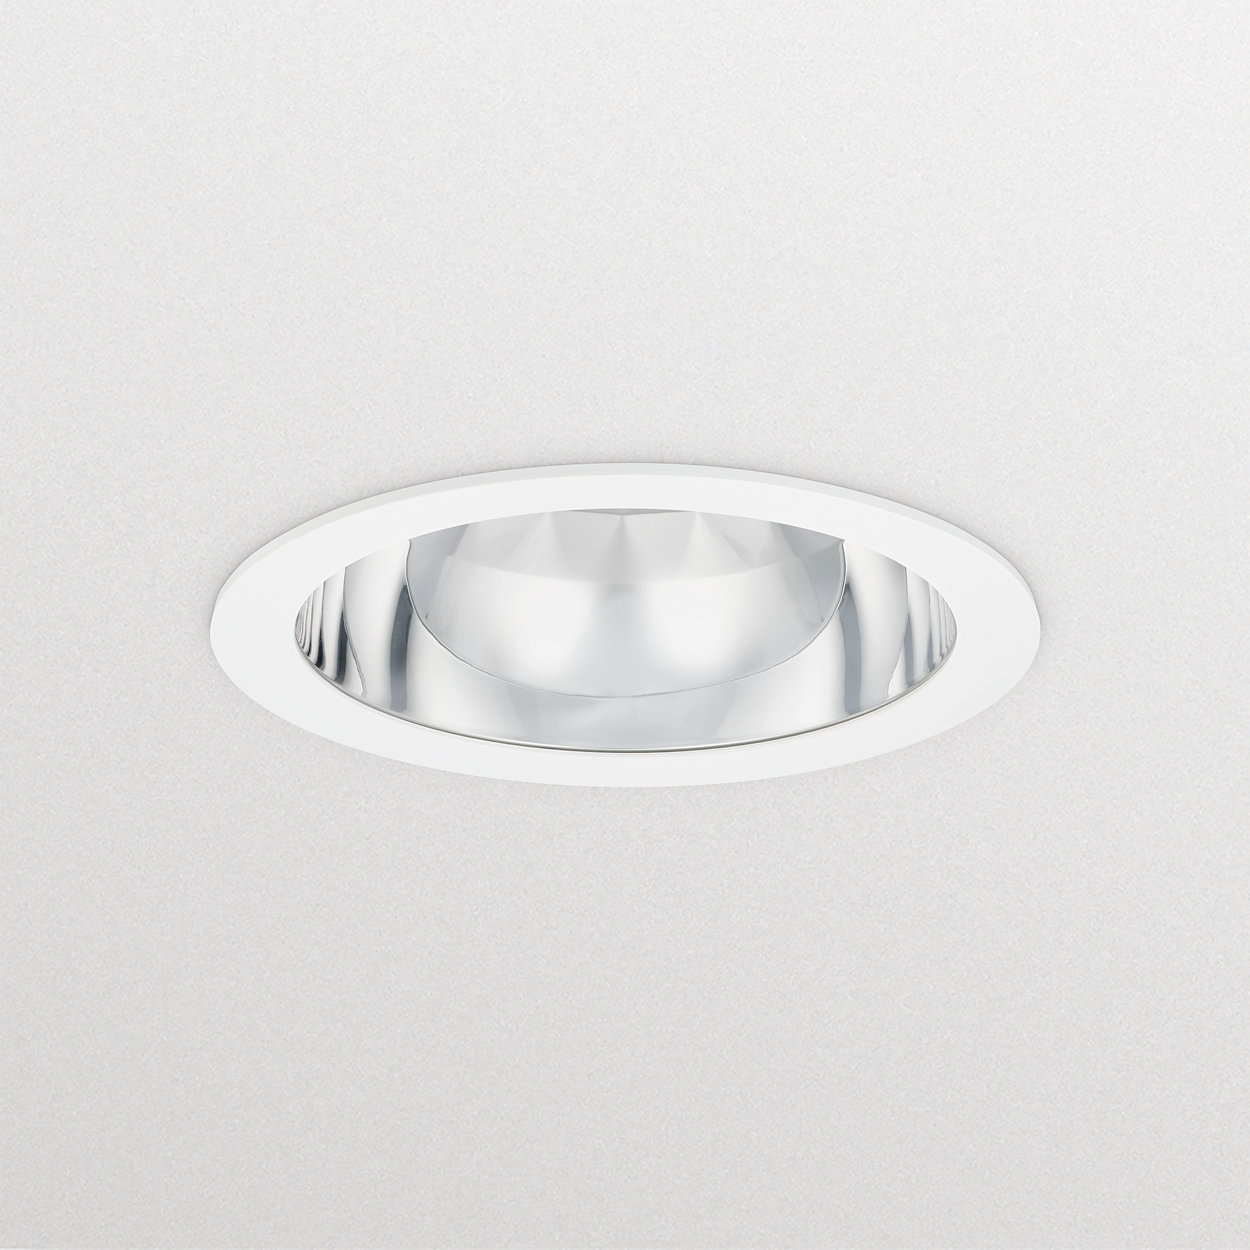 The high-efficiency, sustainable LED solution with GreenSpace downlight